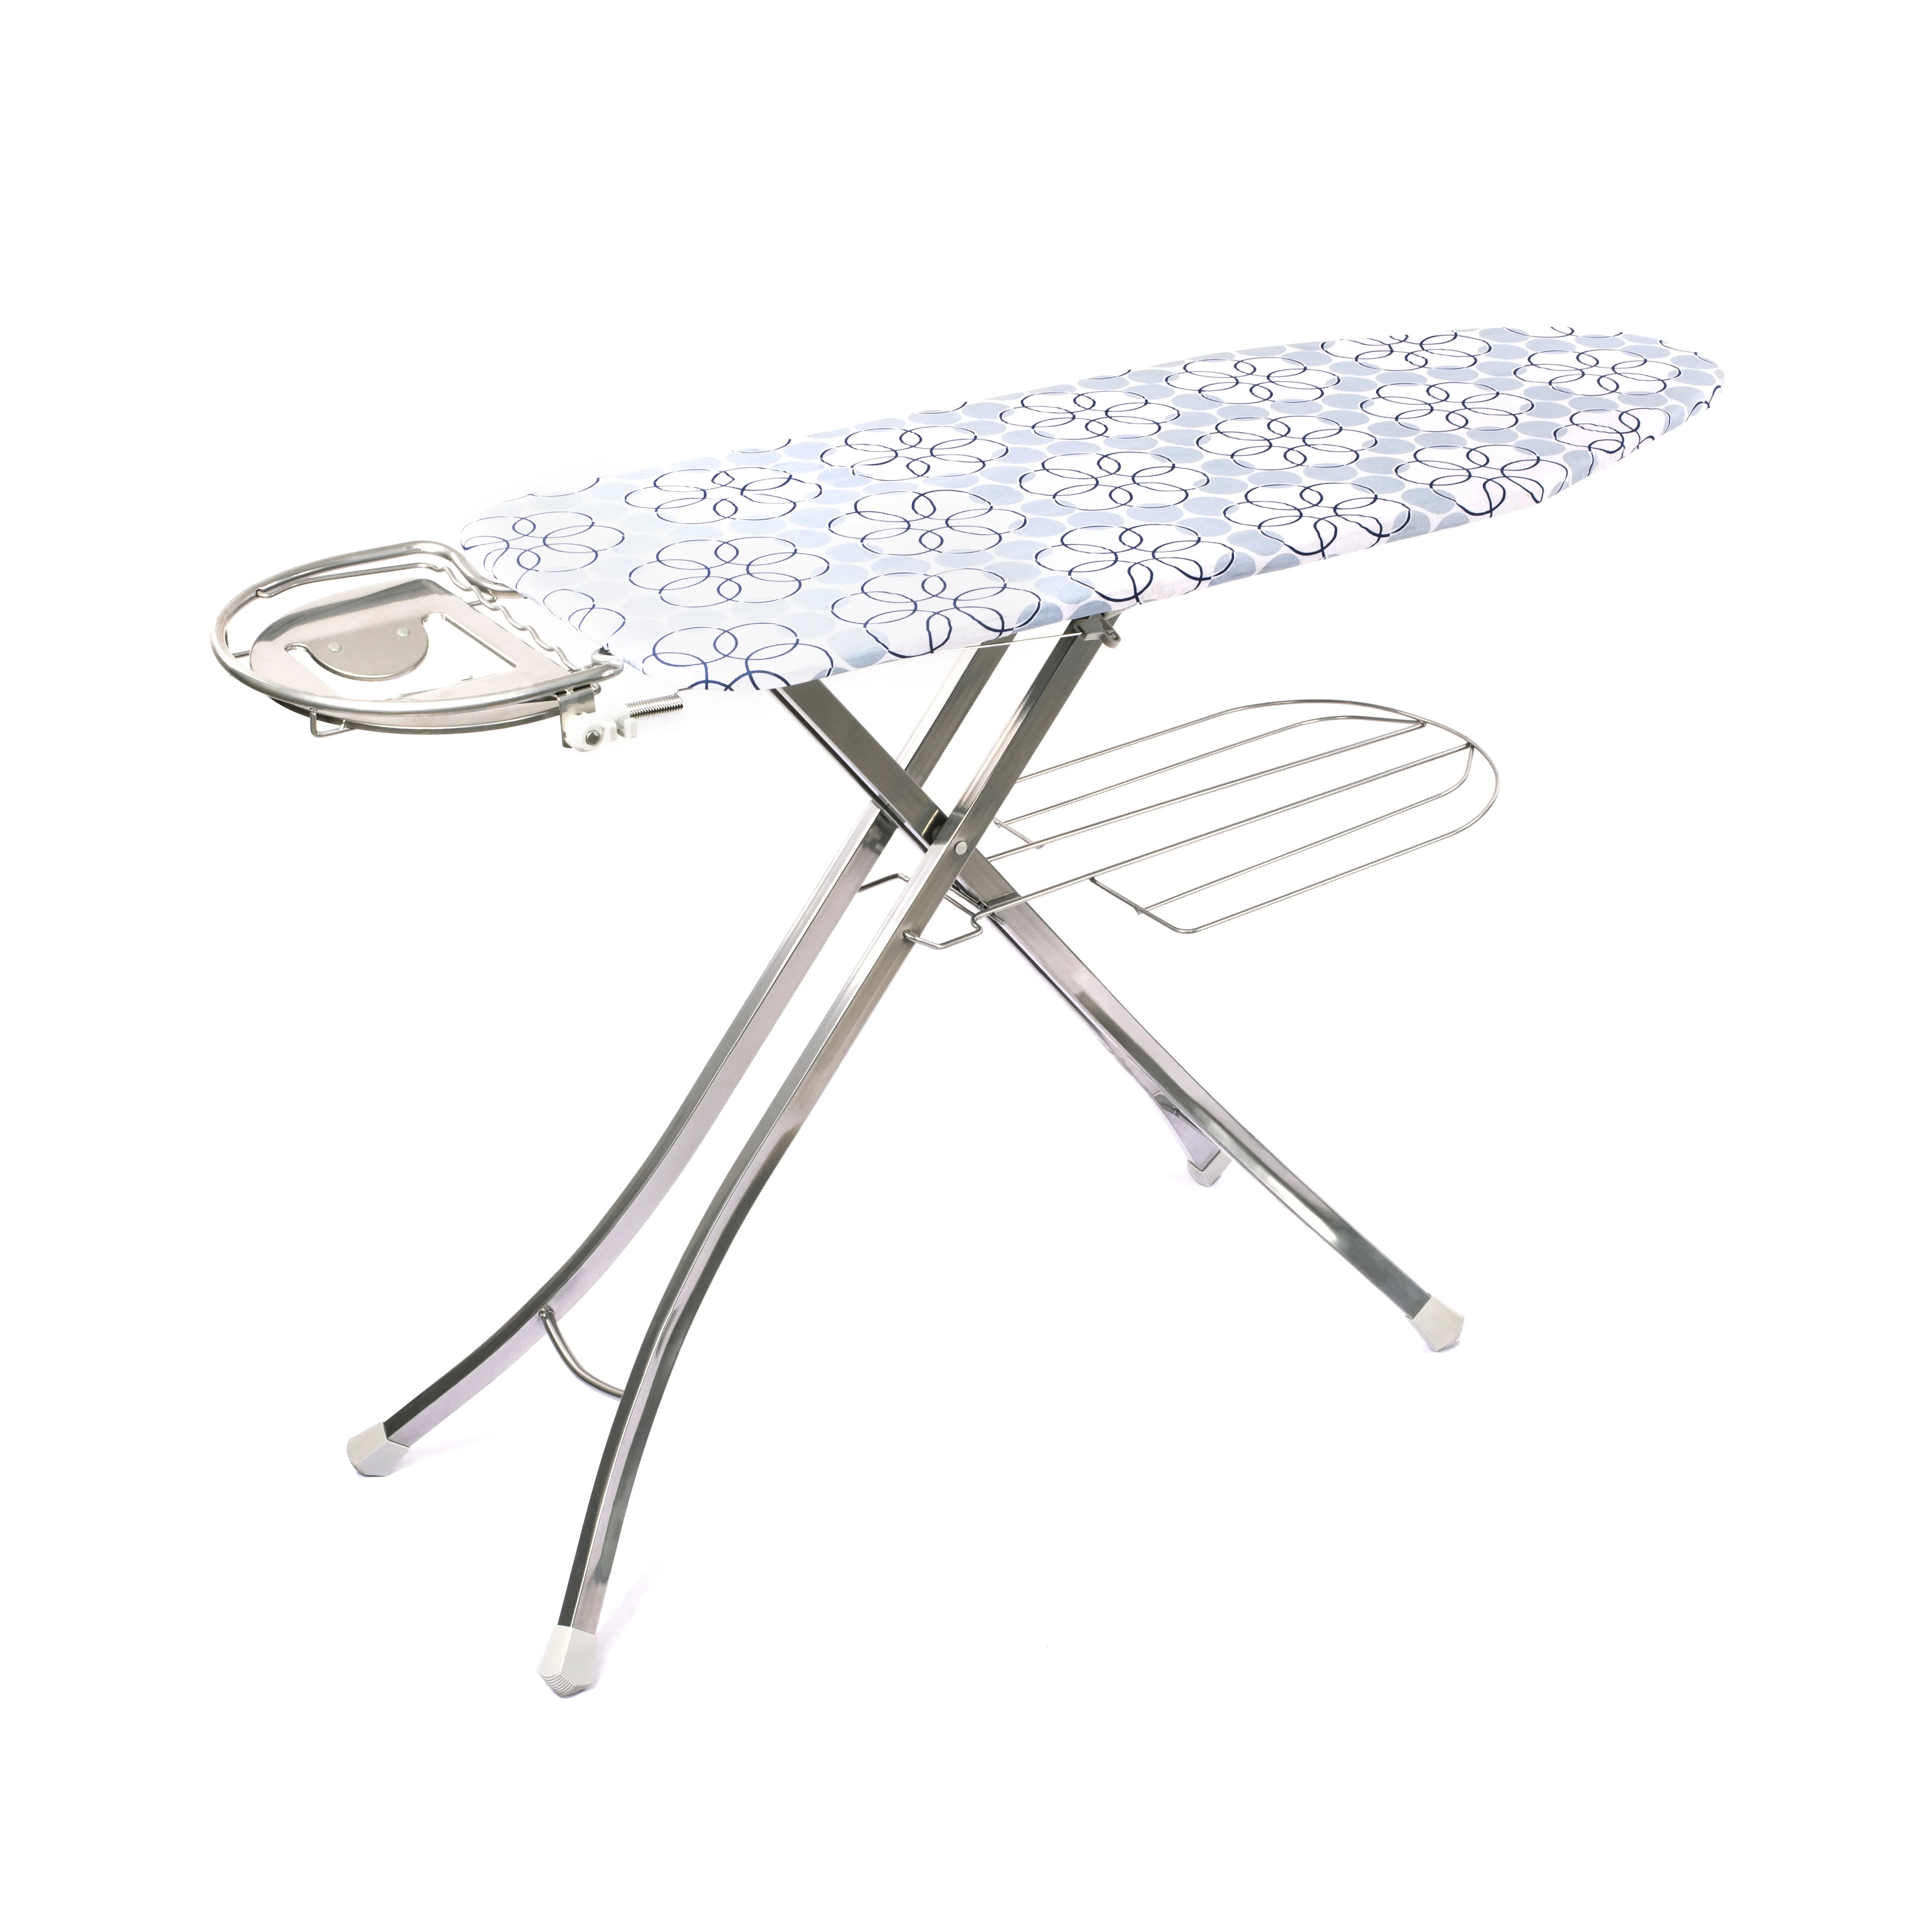 Royalford  RF365IBL 127x46 cm Ironing Board with Steam Iron Rest, Heat Resistant, Contemporary Lightweight Iron Board with Adjustable Height and Lock System